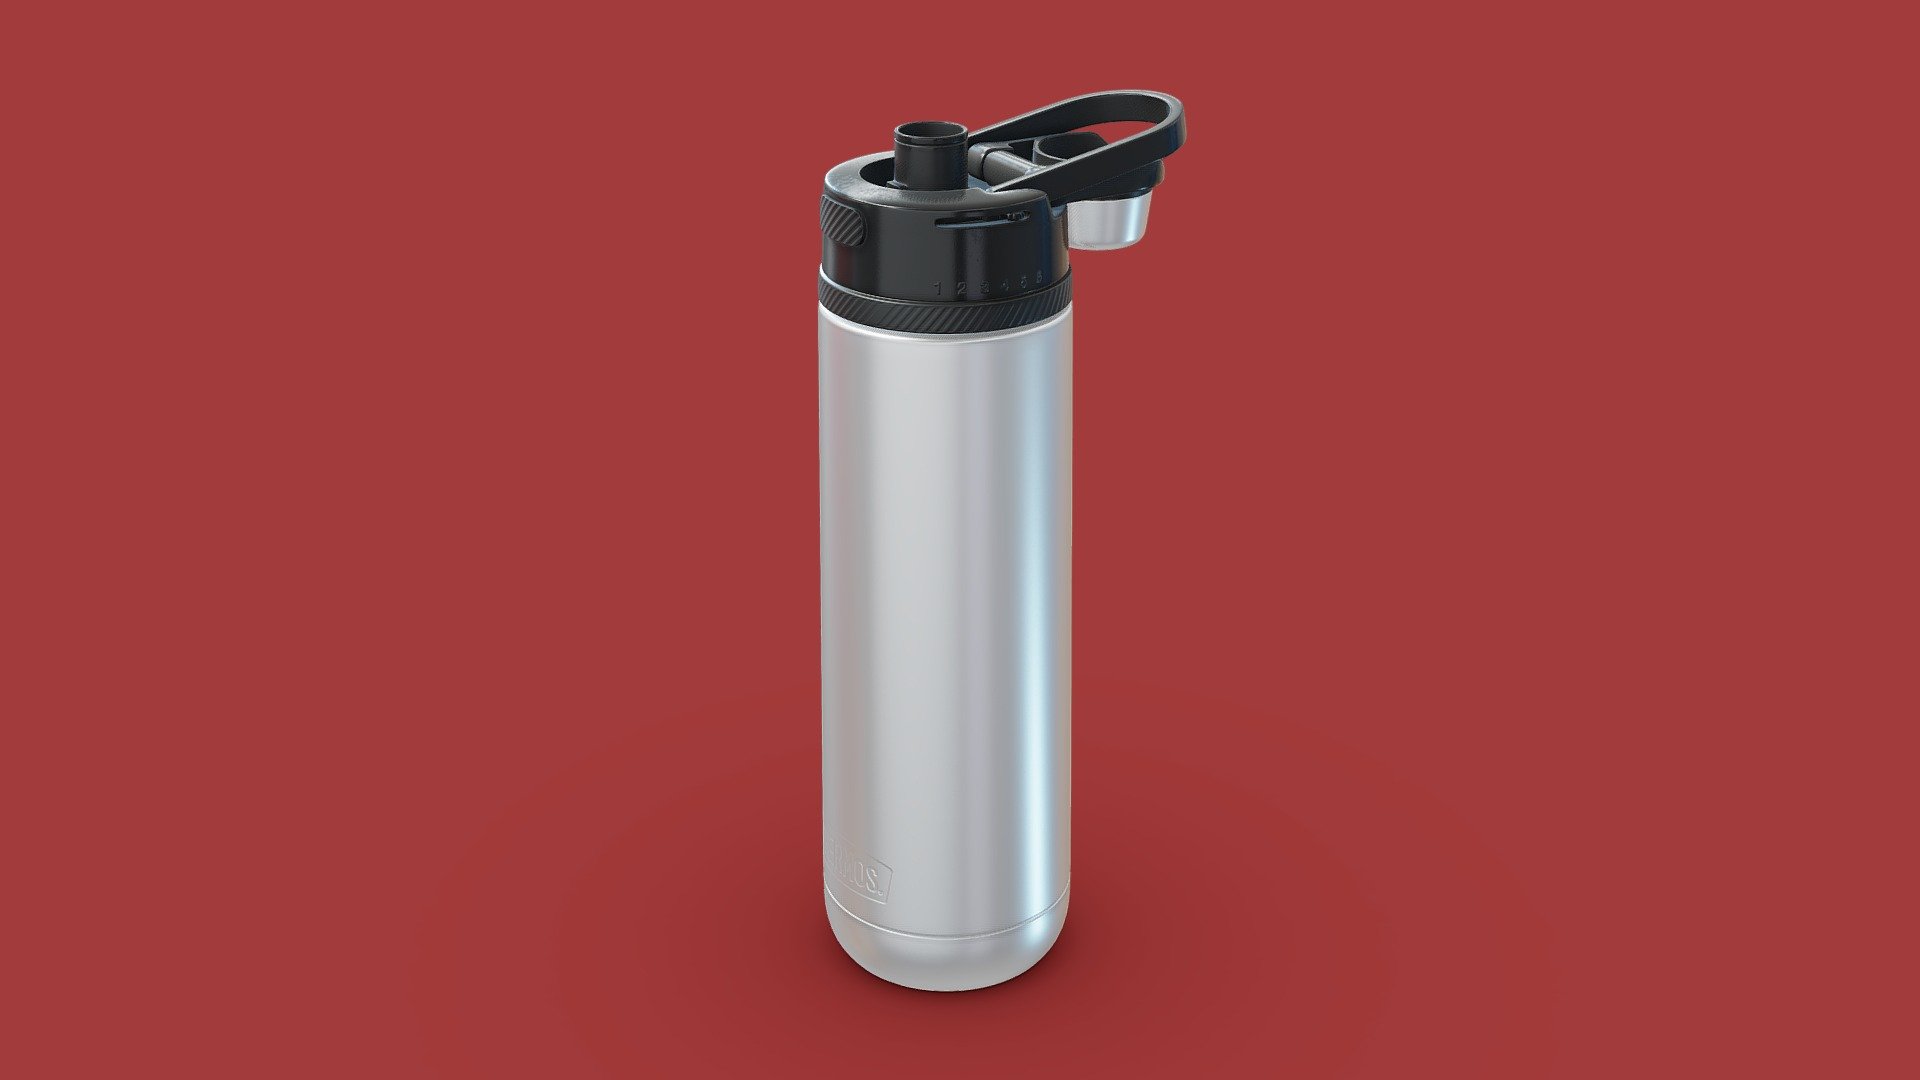 Modeling with Blender 2.83 

Painting Substance Painter 



https://www.thermos.com/guardian-collection-by-thermos-stainless-steel-hydration-bottle-24oz.html - Thermos - Hydration Bottle 24OZ - Download Free 3D model by Berk Gedik (@berkgedik) 3d model